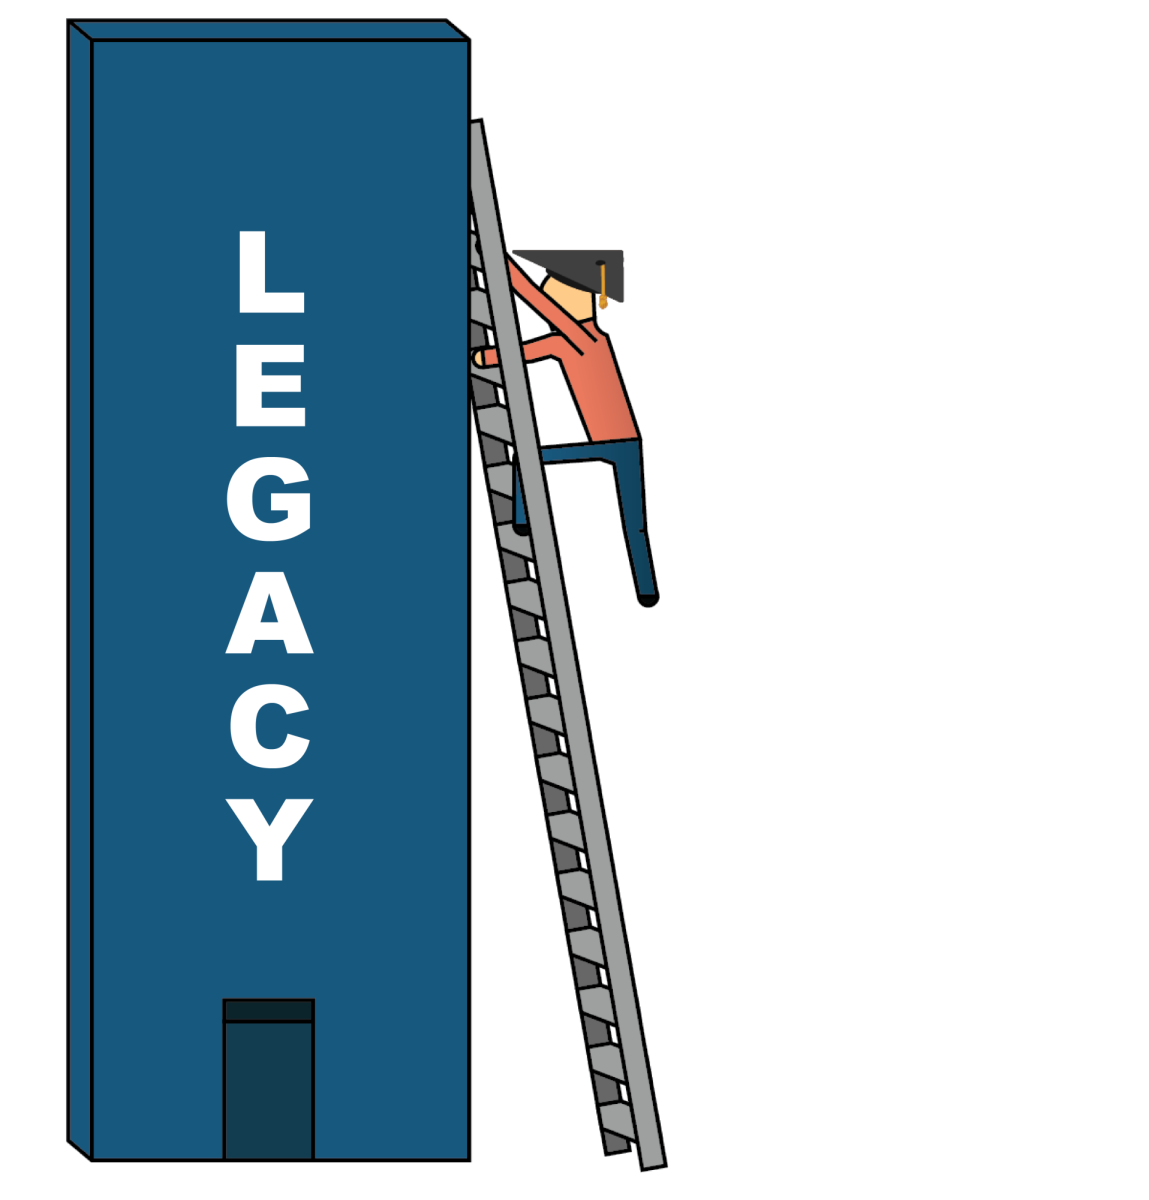 The legacy ladder